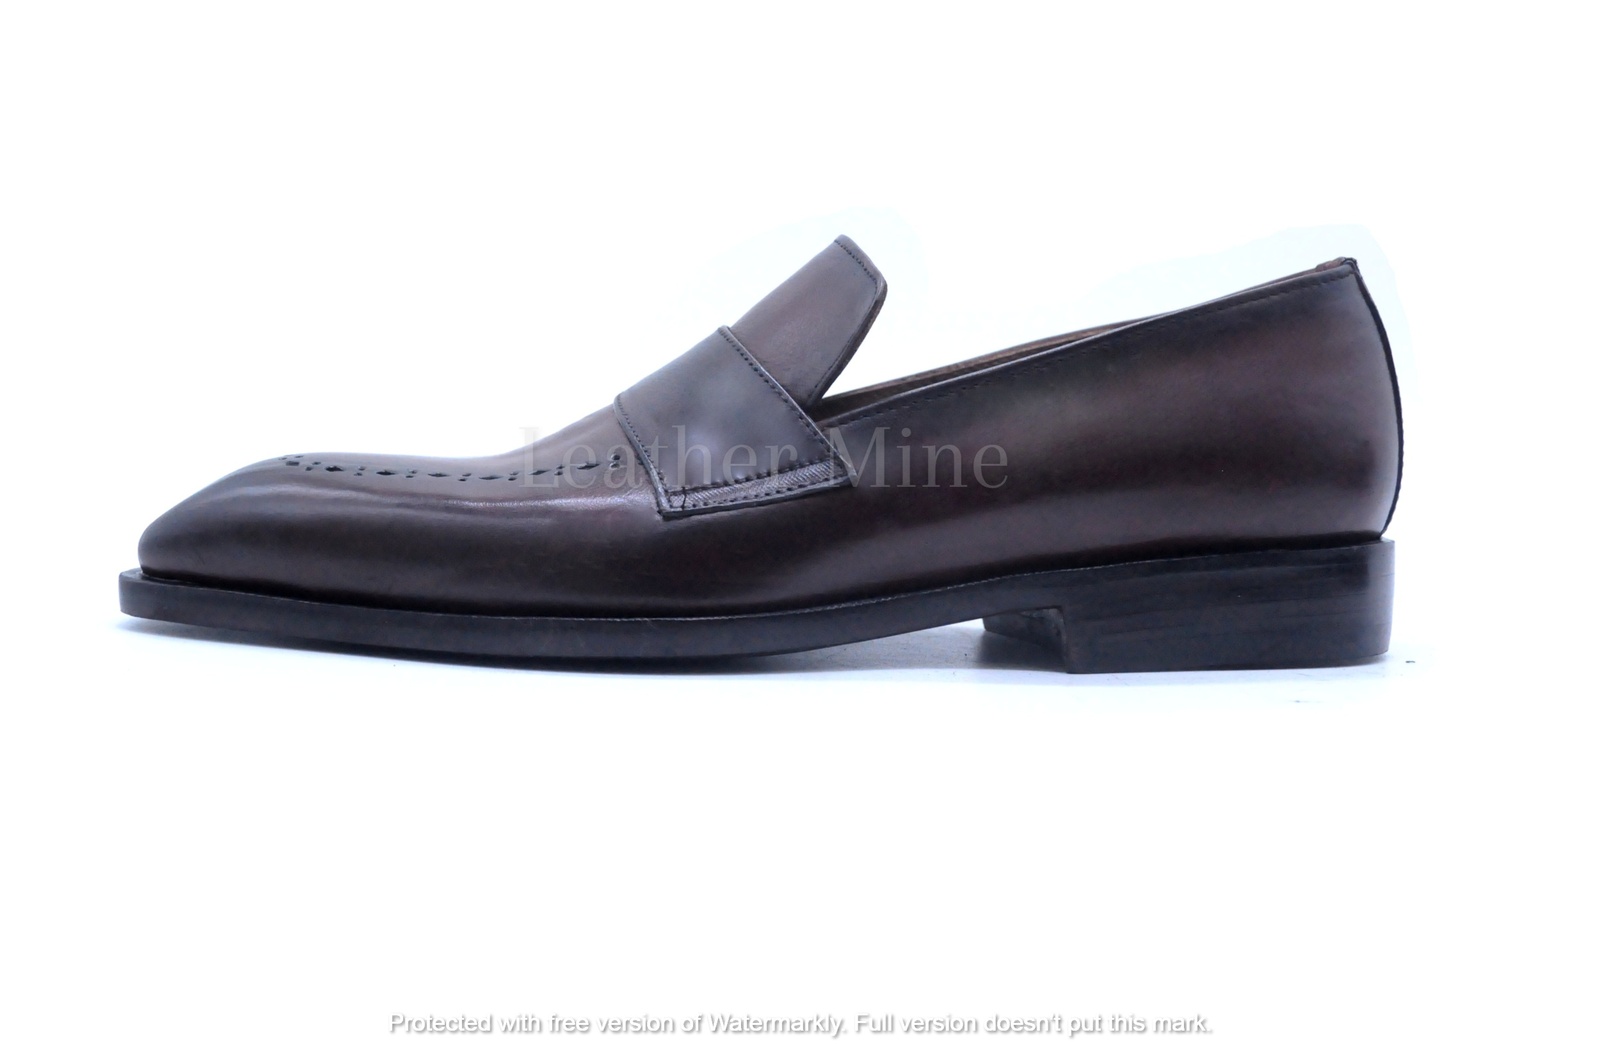 Leather Mine - Handmade ox blood loafers dress shoes, genuine leather formal shoes